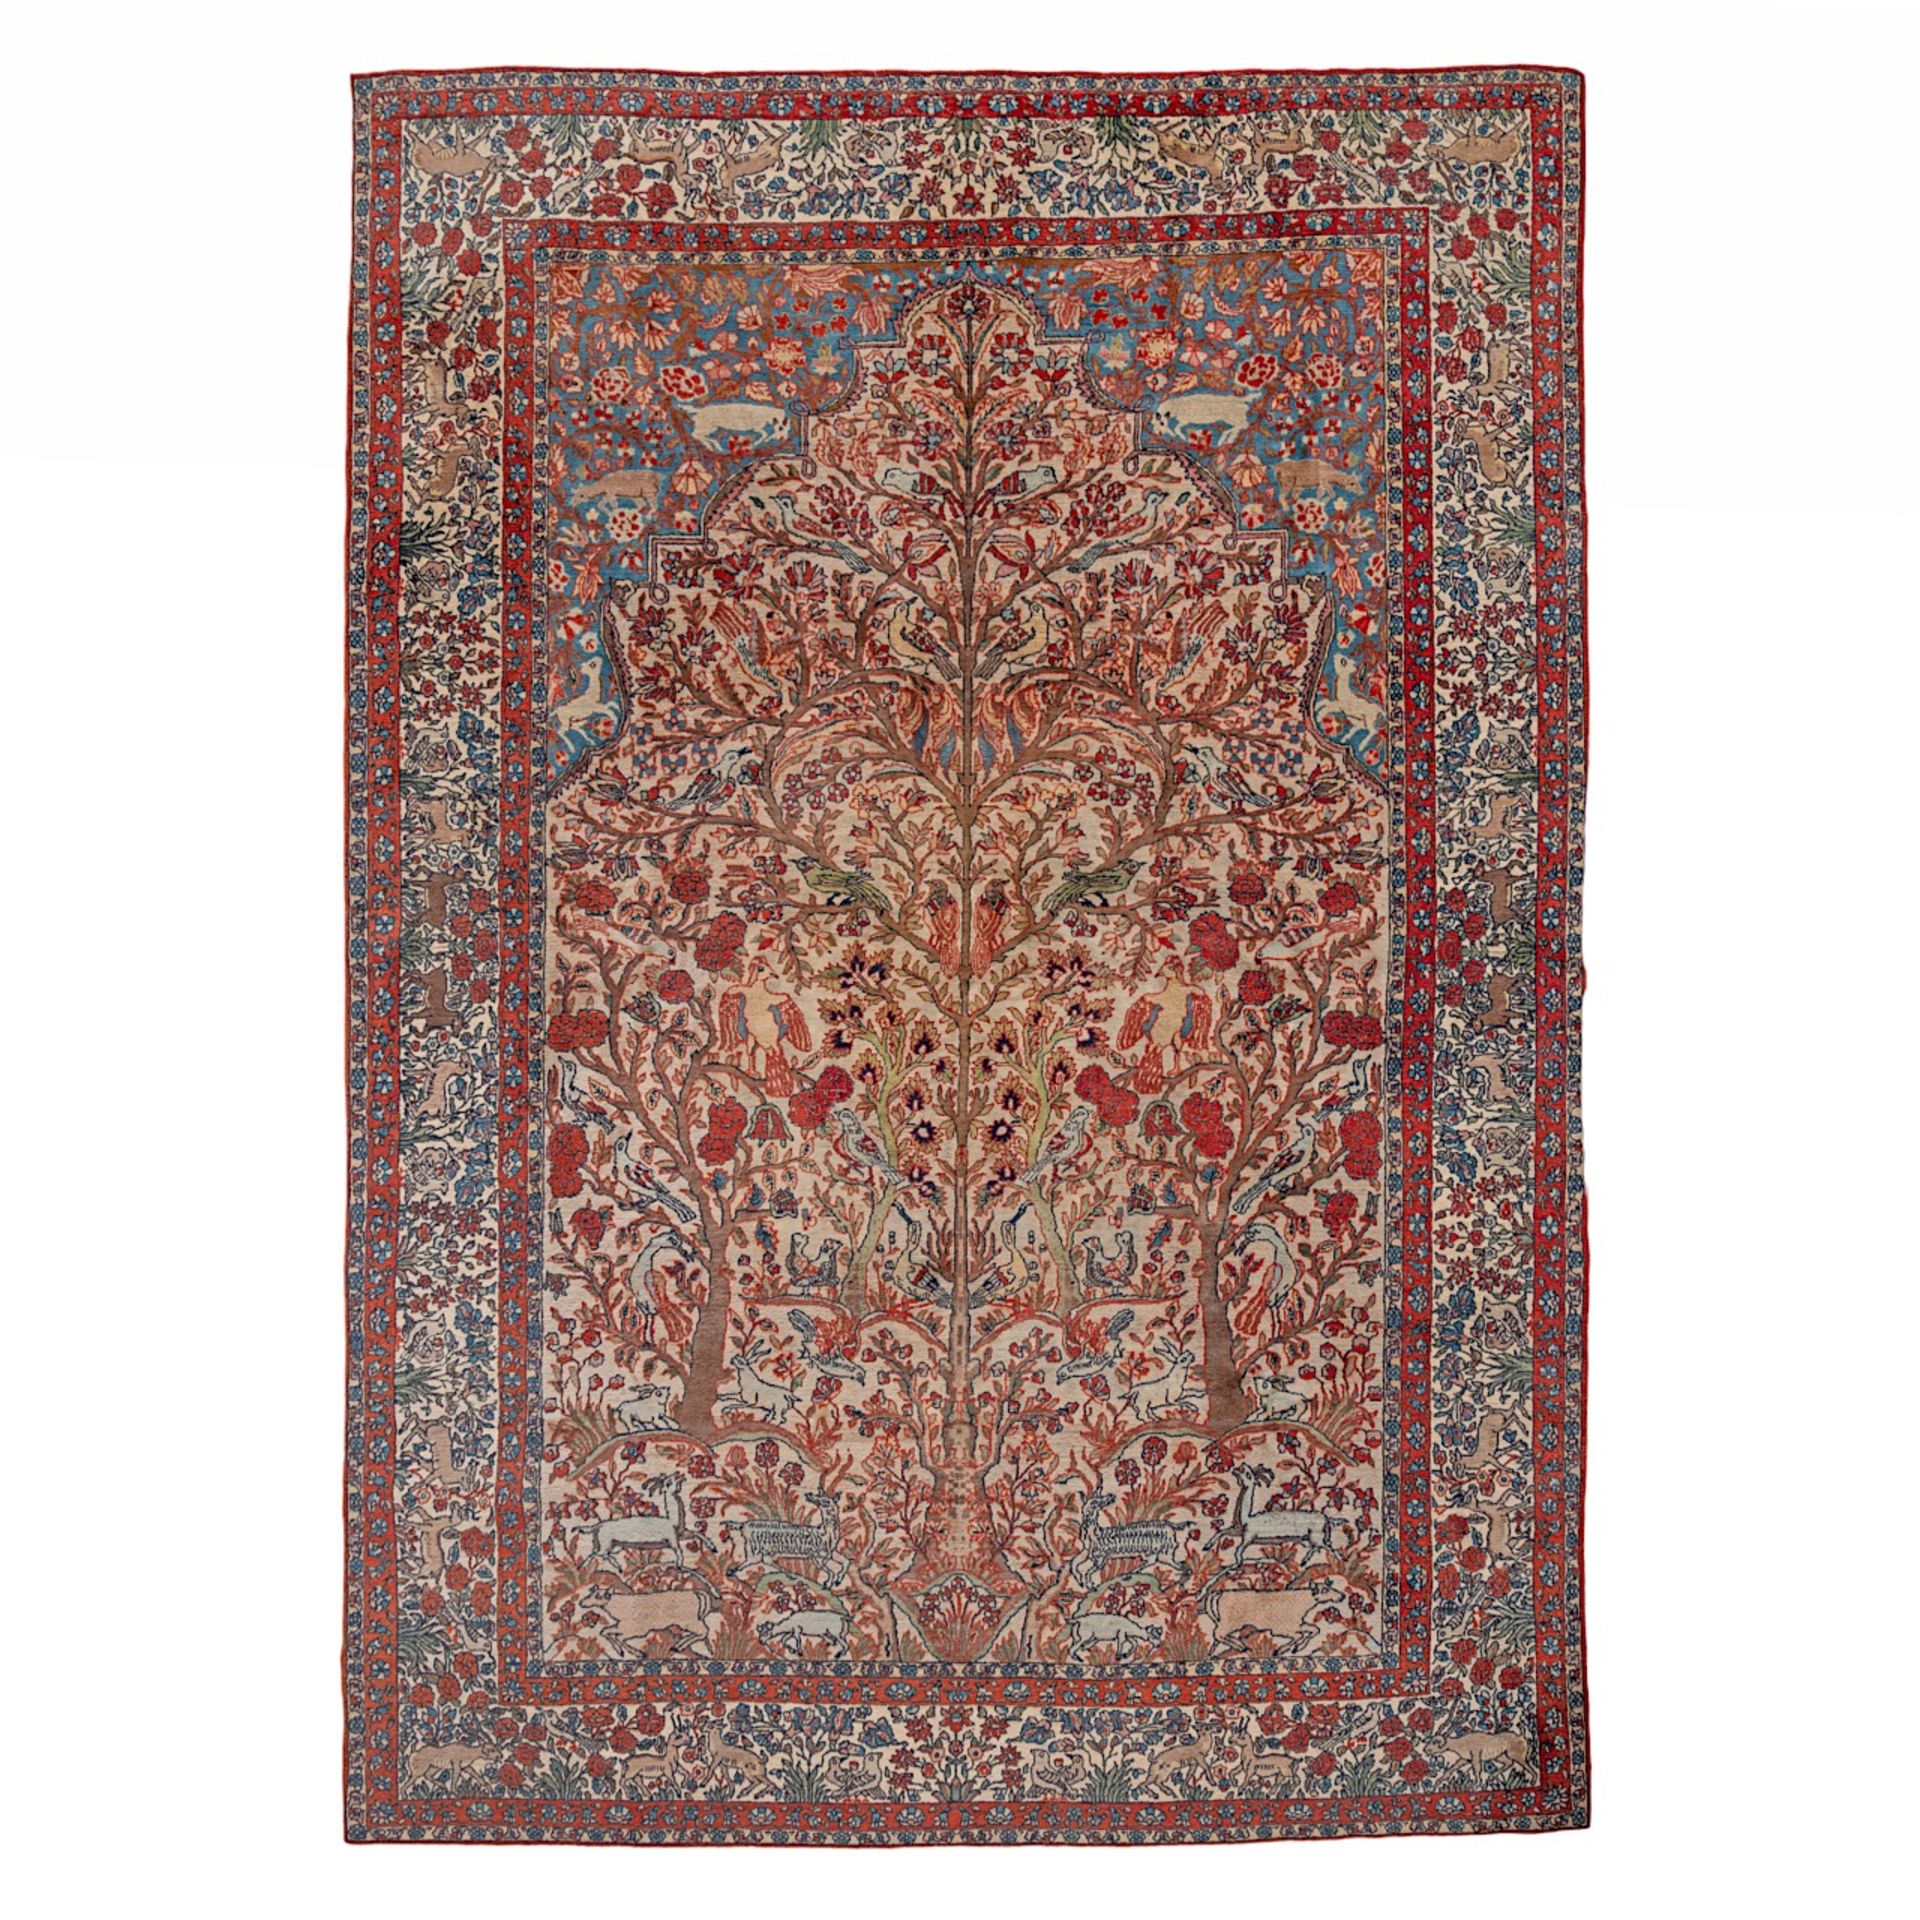 An Oriental woollen rug, decorated with the tree of life and paradise scenery, 297 x 216 cm